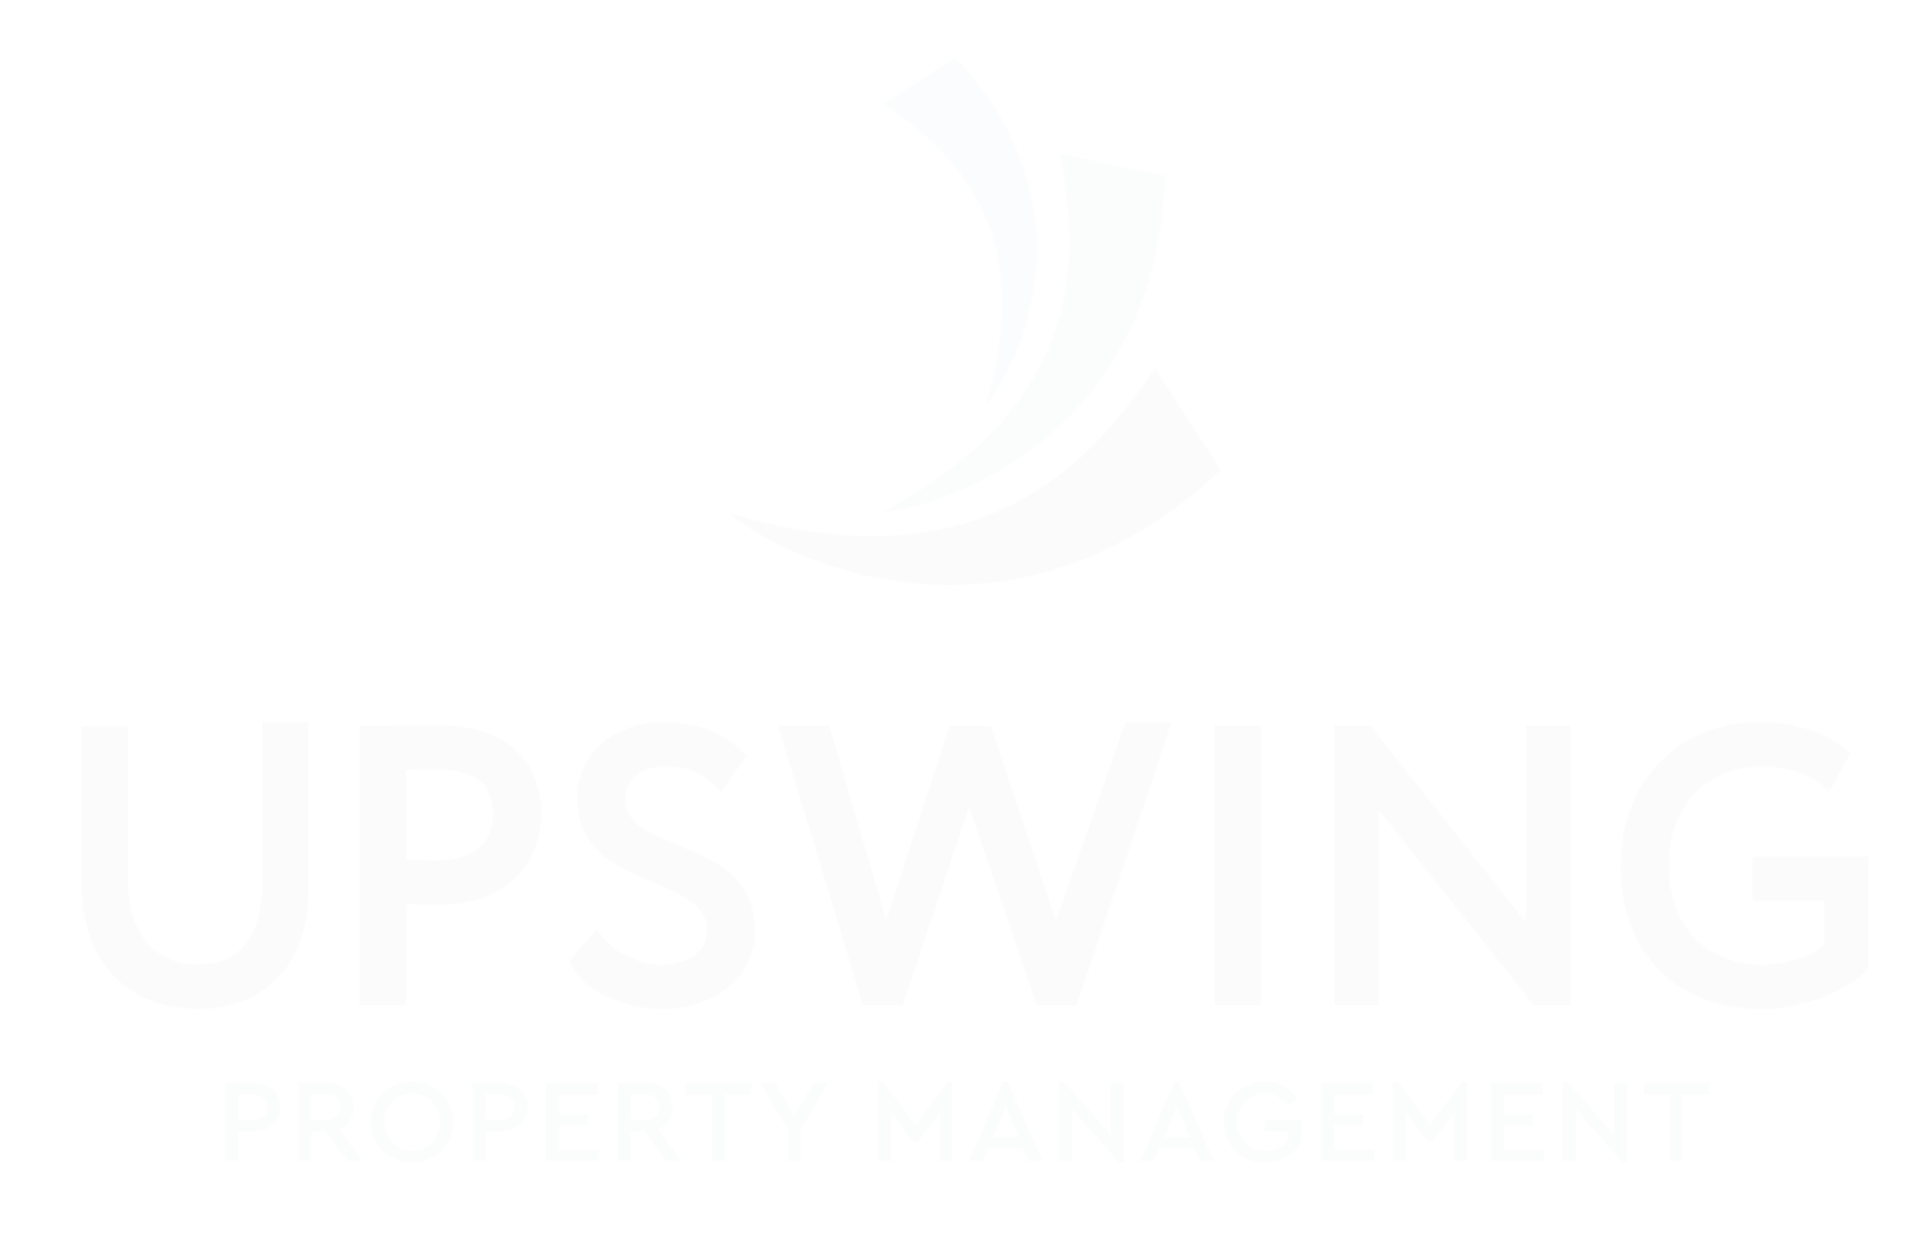 Upswing Property Management Logo in Footer - linked to home page